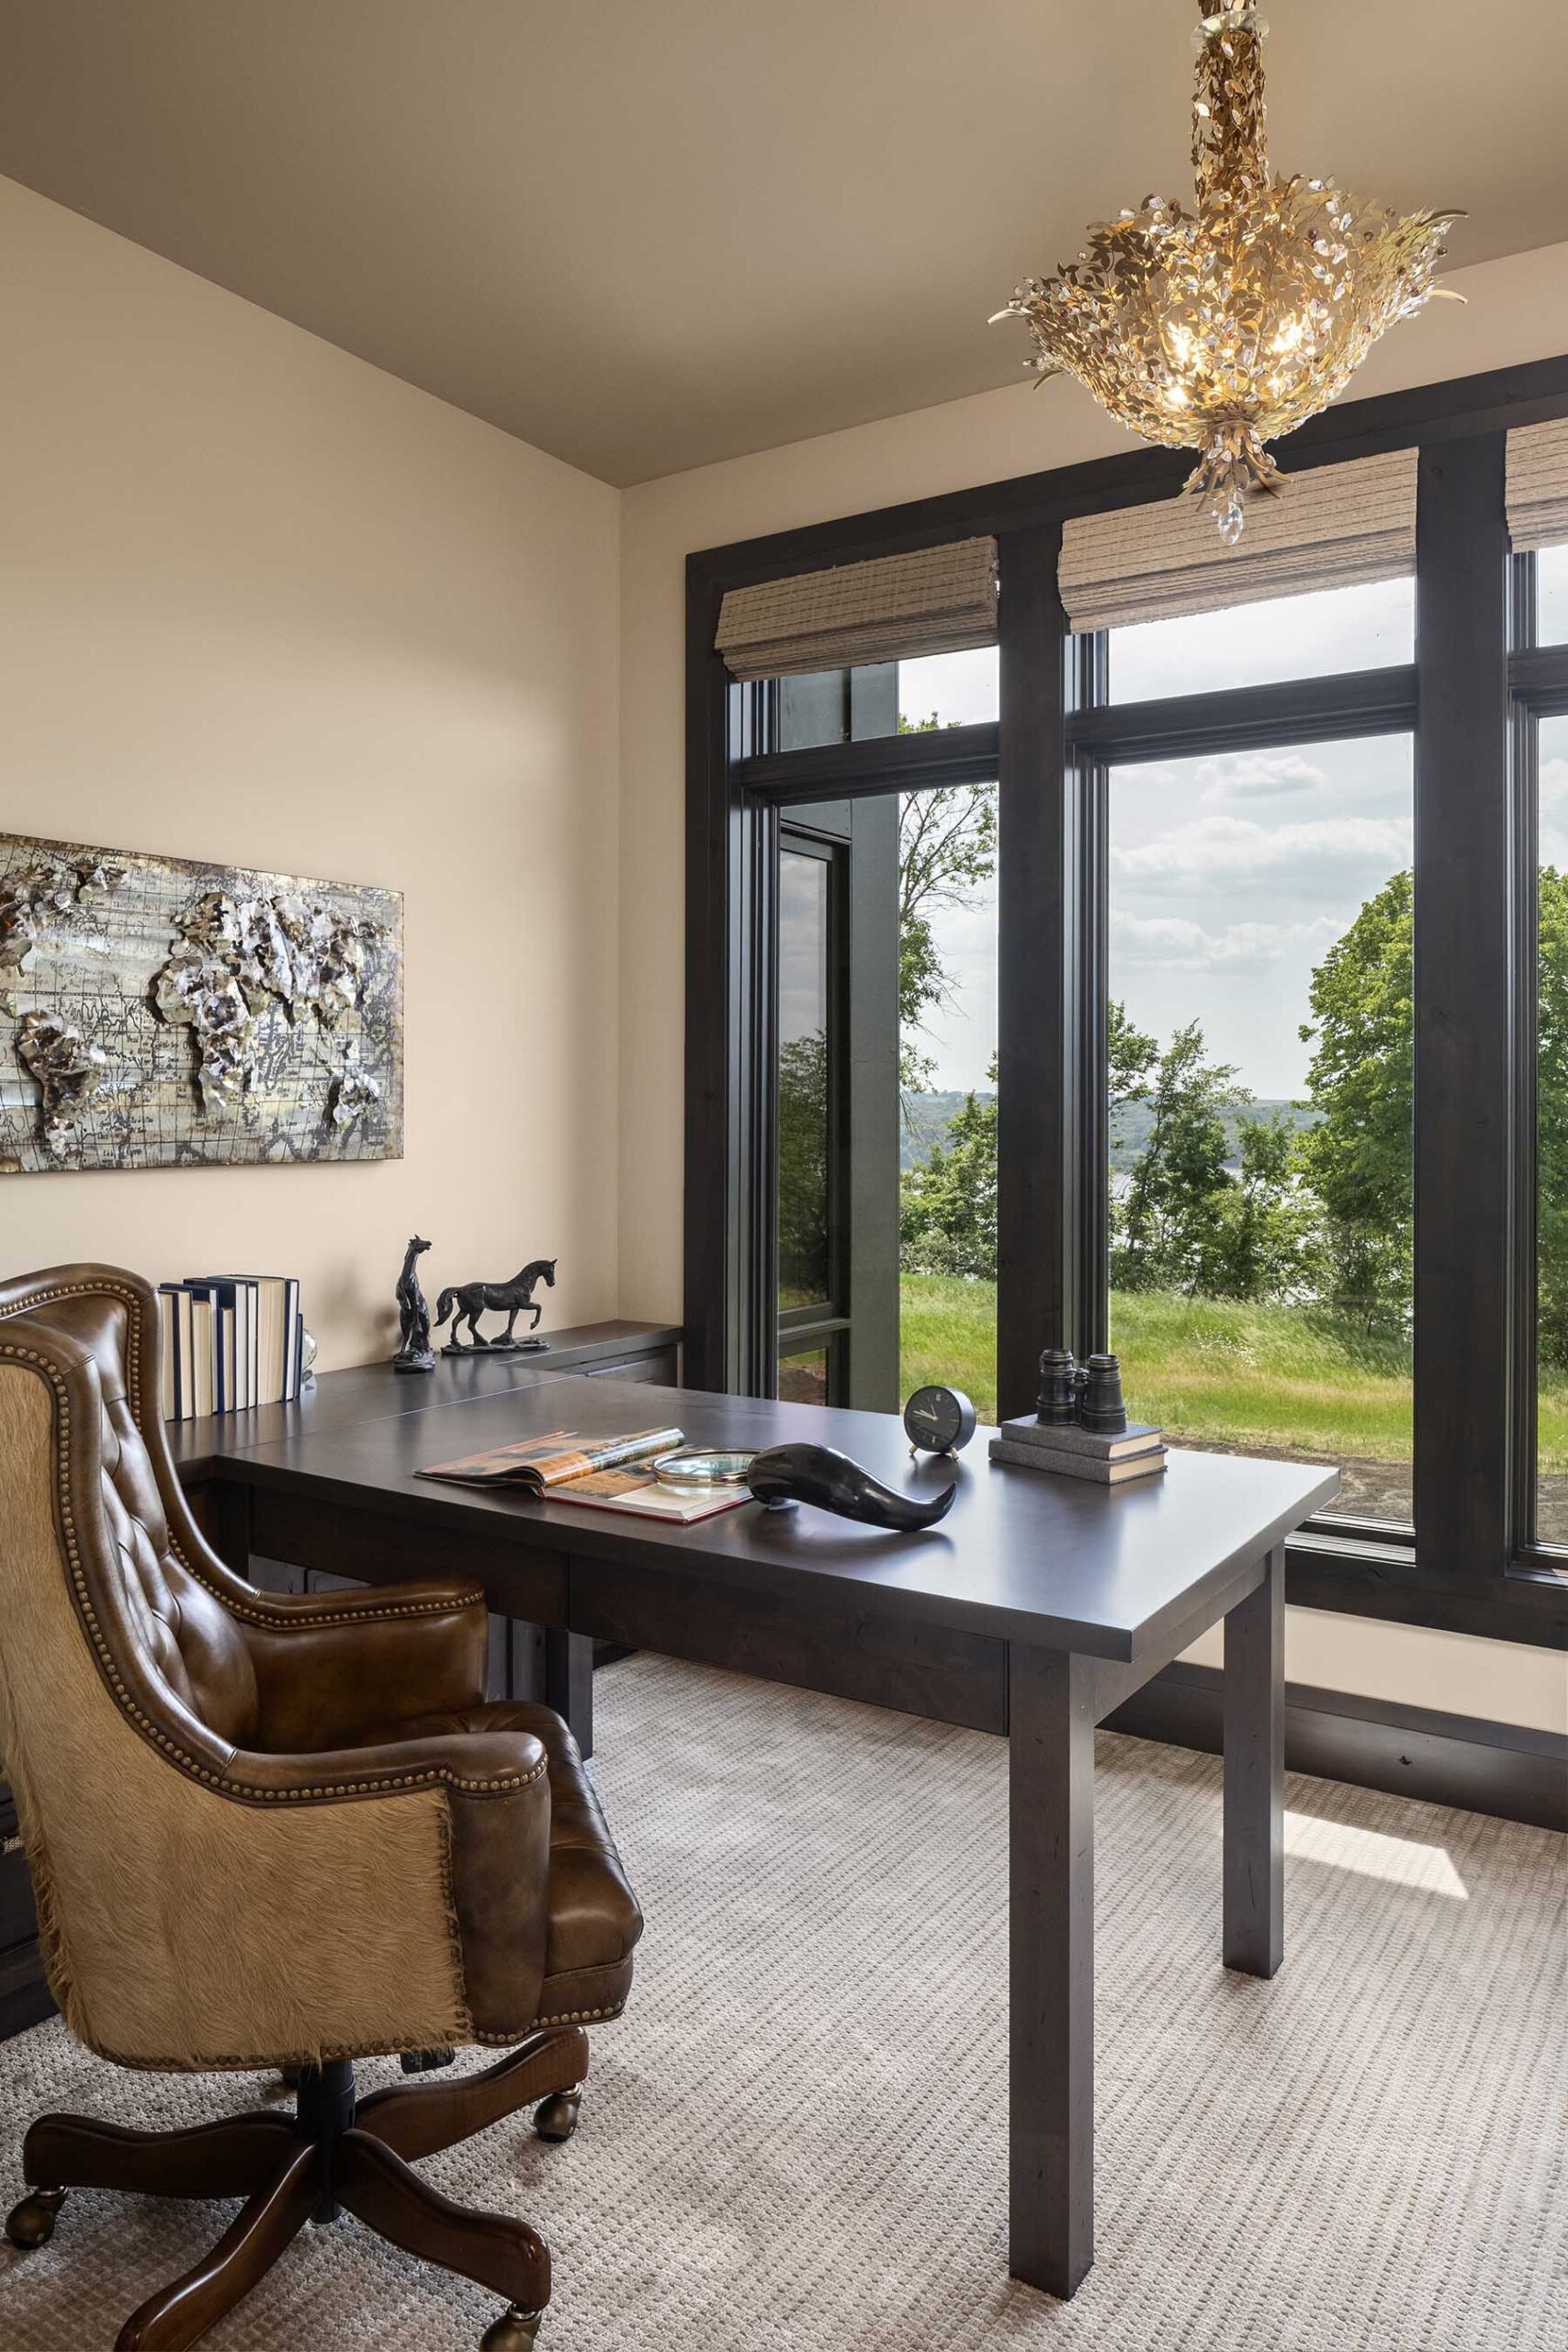 A modern home office with large windows and a leather chair in a Tuscan Mediterranean style.